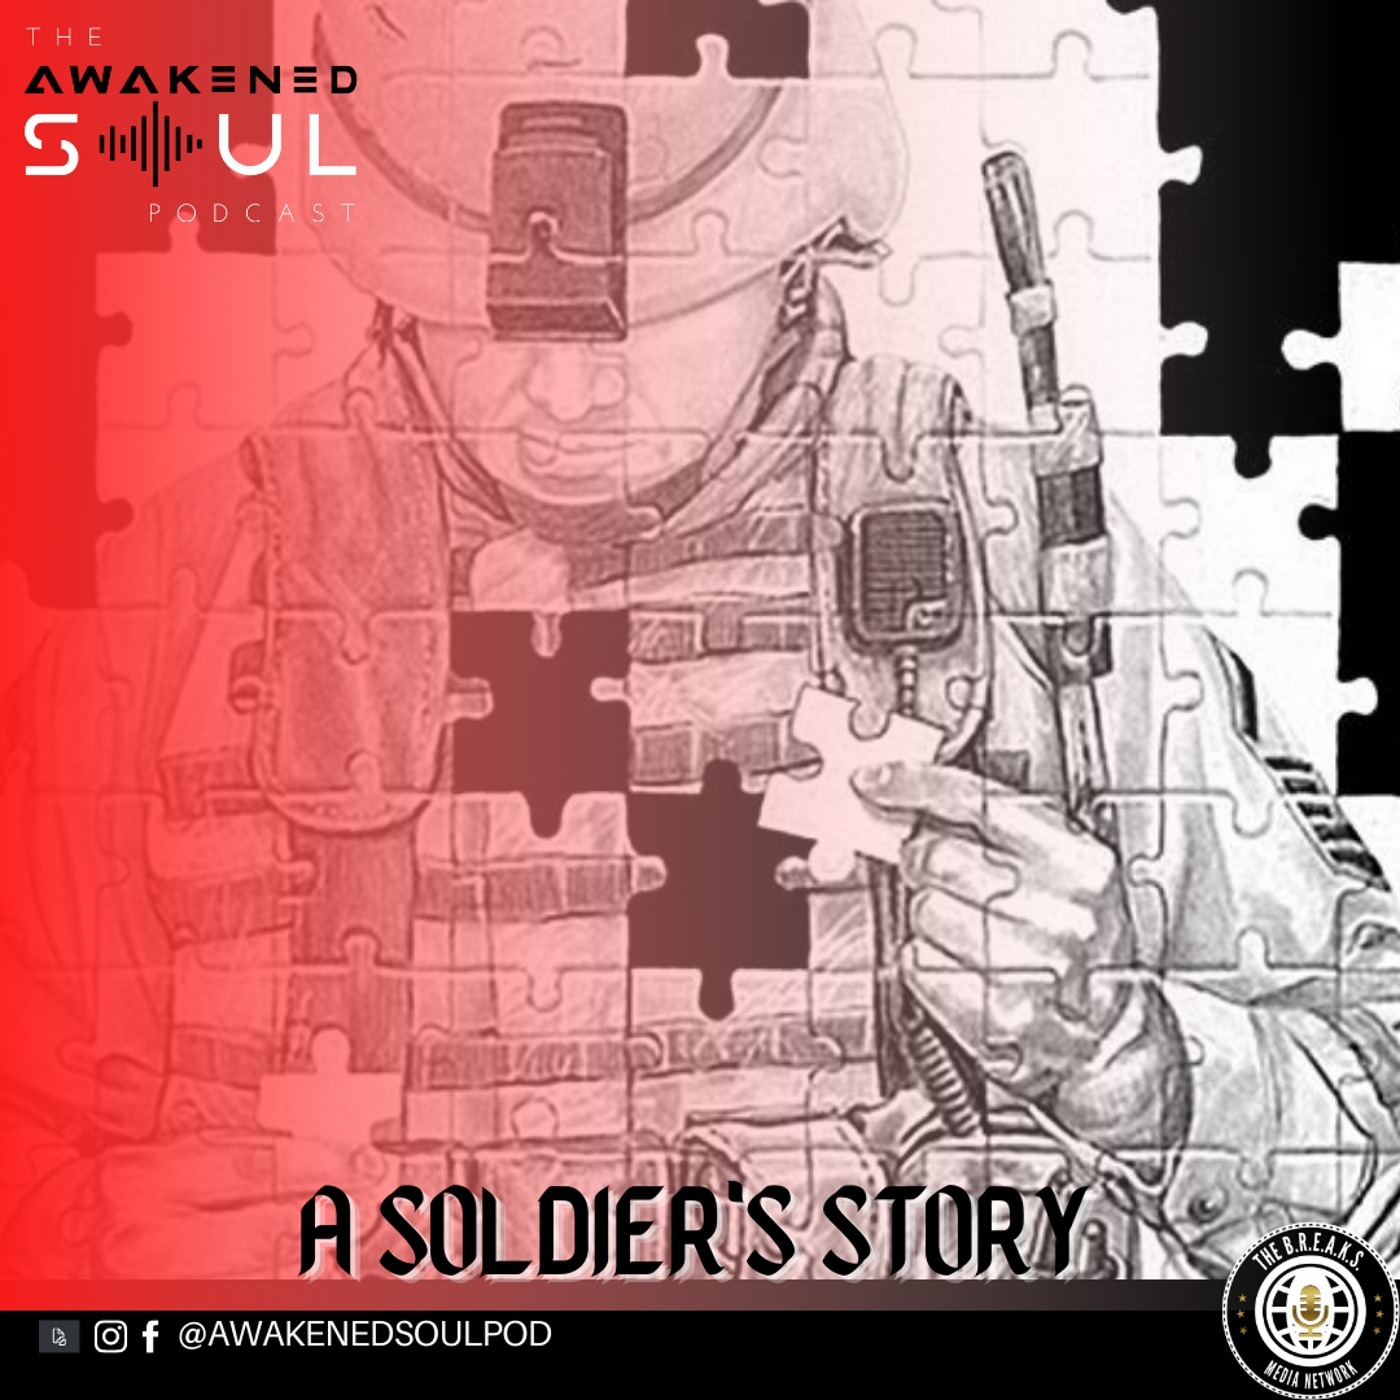 A Soldier’s Story